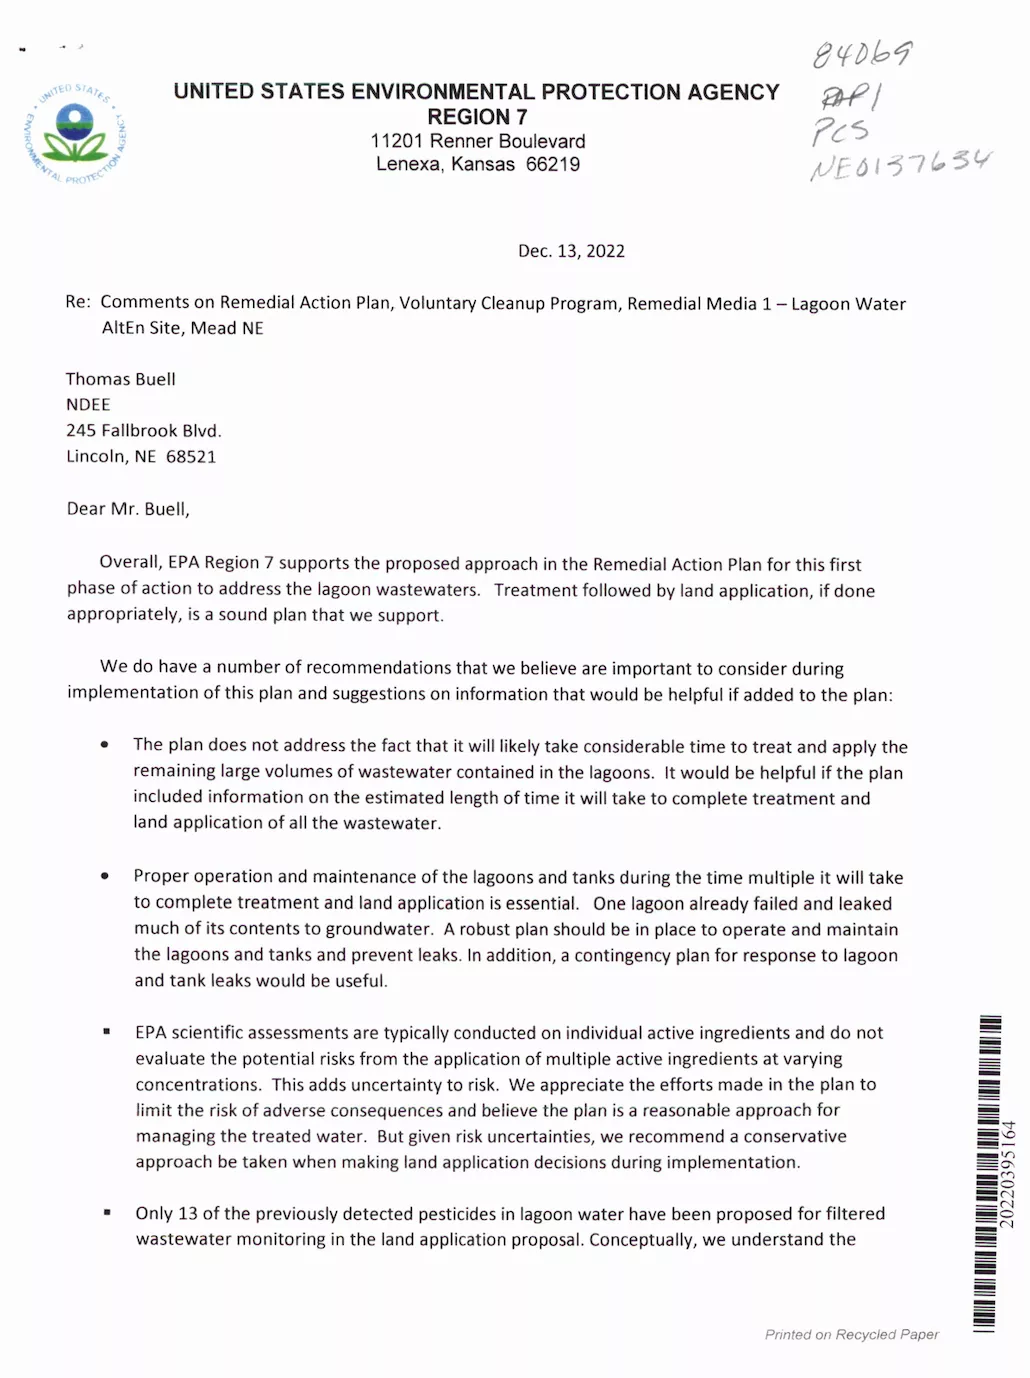 EPA letter page 1